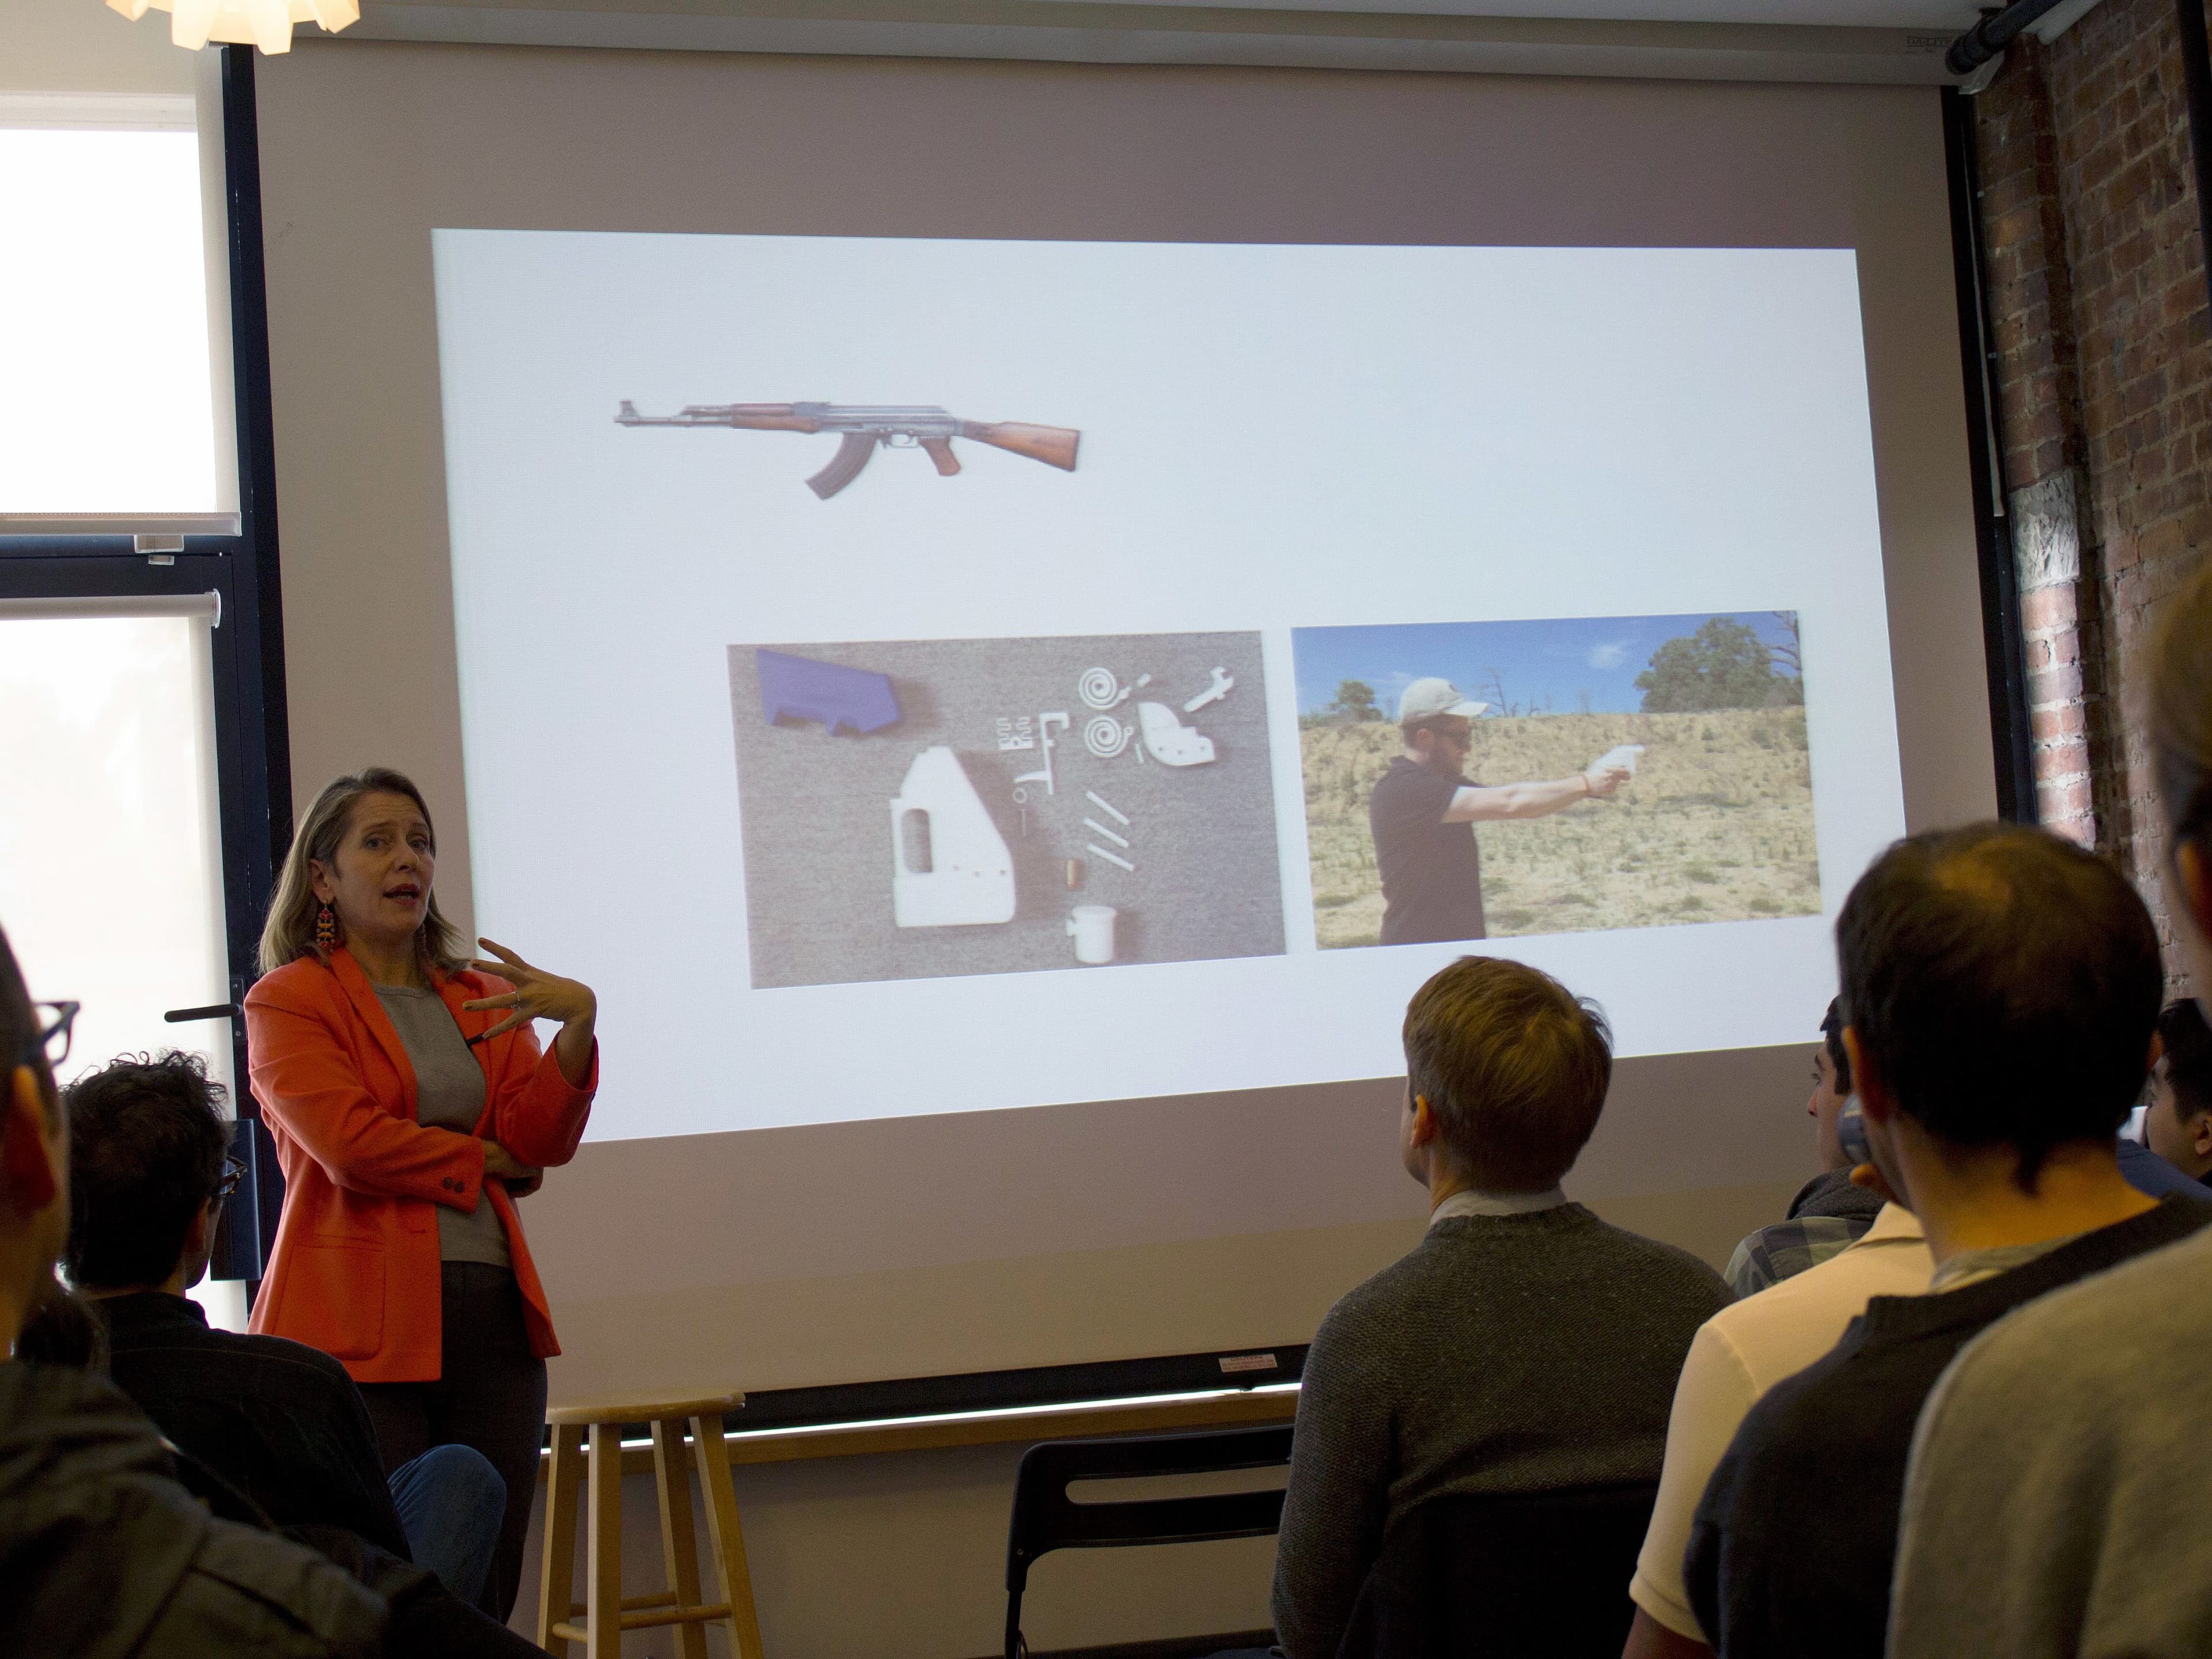 A woman in an orange blazer is speaking in front of a group of people in a classroom setting. On the screen behind her are images of a rifle, 3D-printed gun parts, and a person shooting a firearm outdoors. The audience is seated and attentively listening.